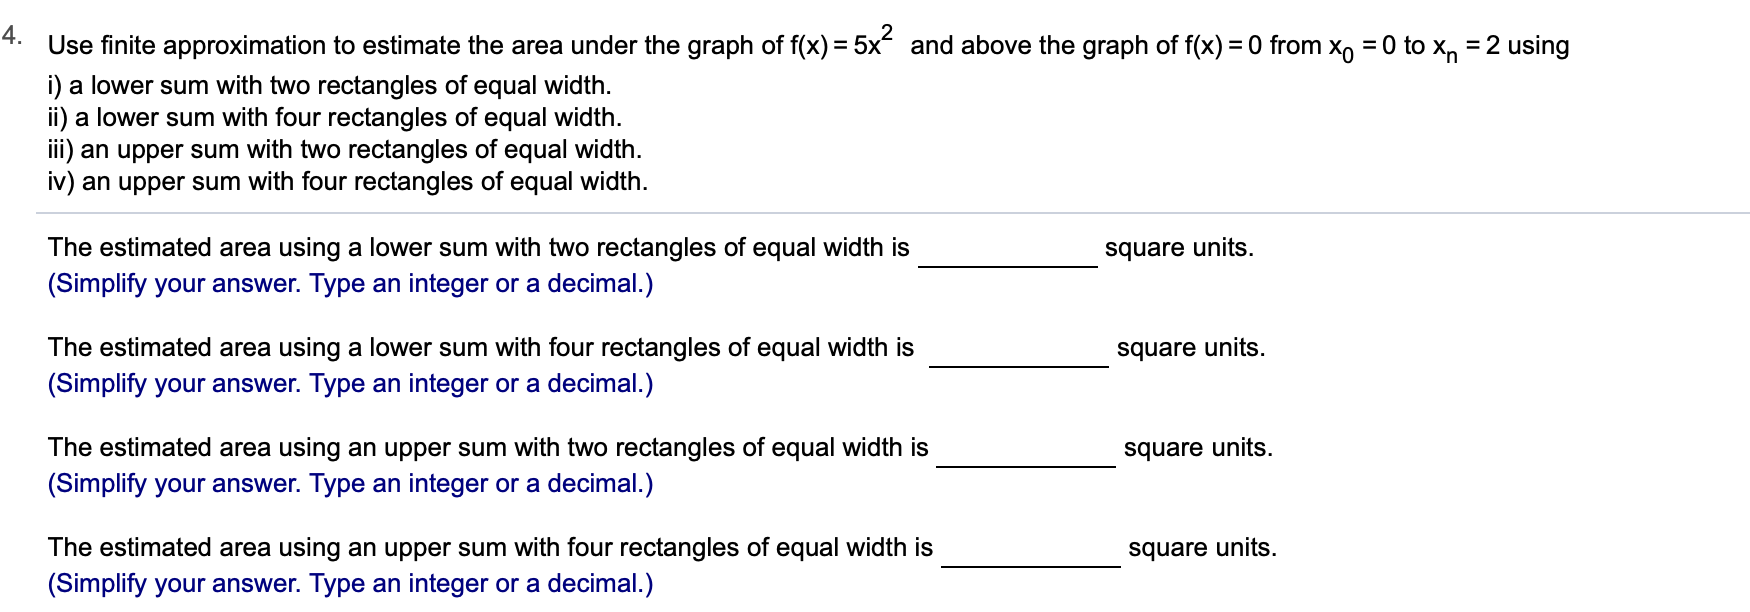 4.
Use finite approximation to estimate the area under the graph of f(x) 5x
i) a lower sum with two rectangles of equal width
ii) a lower sum with four rectangles of equal width
i) an upper sum with two rectangles of equal width.
iv) an upper sum with four rectangles of equal width
and above the graph of f(x) 0 from Xo = 0 to x, = 2 using
The estimated area using a lower sum with two rectangles of equal width is
(Simplify your answer. Type an integer or a decimal.)
square units
The estimated area using a lower sum with four rectangles of equal width is
square units
(Simplify your answer. Type an integer or a decimal.)
The estimated area using an upper sum with two rectangles of equal width is
square units
(Simplify your answer. Type an integer or a decimal.)
The estimated area using an upper sum with four rectangles of equal width is
(Simplify your answer. Type an integer or a decimal.)
square units
